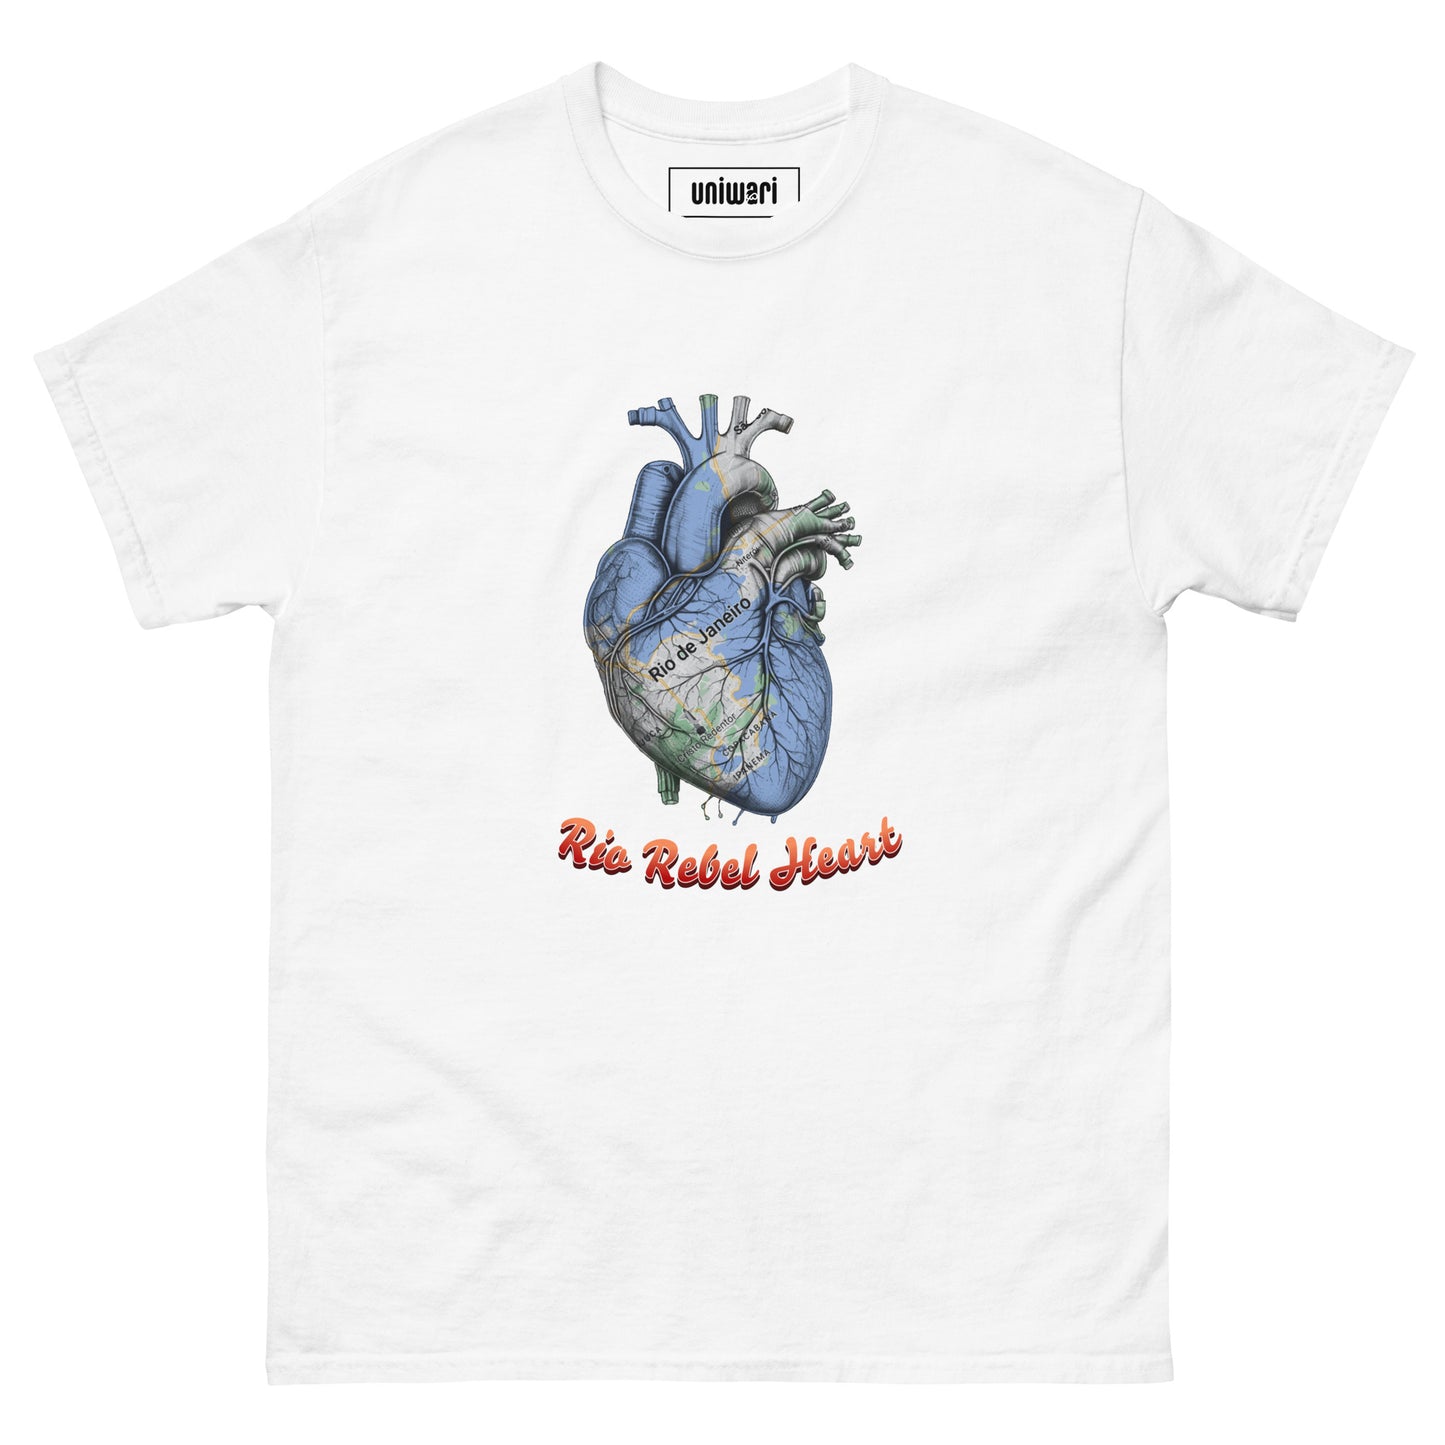 White High Quality Tee - Front Design with a Heart Shaped Map of Rio de Janeiro and a Phrase "Rio Rebel Heart" print